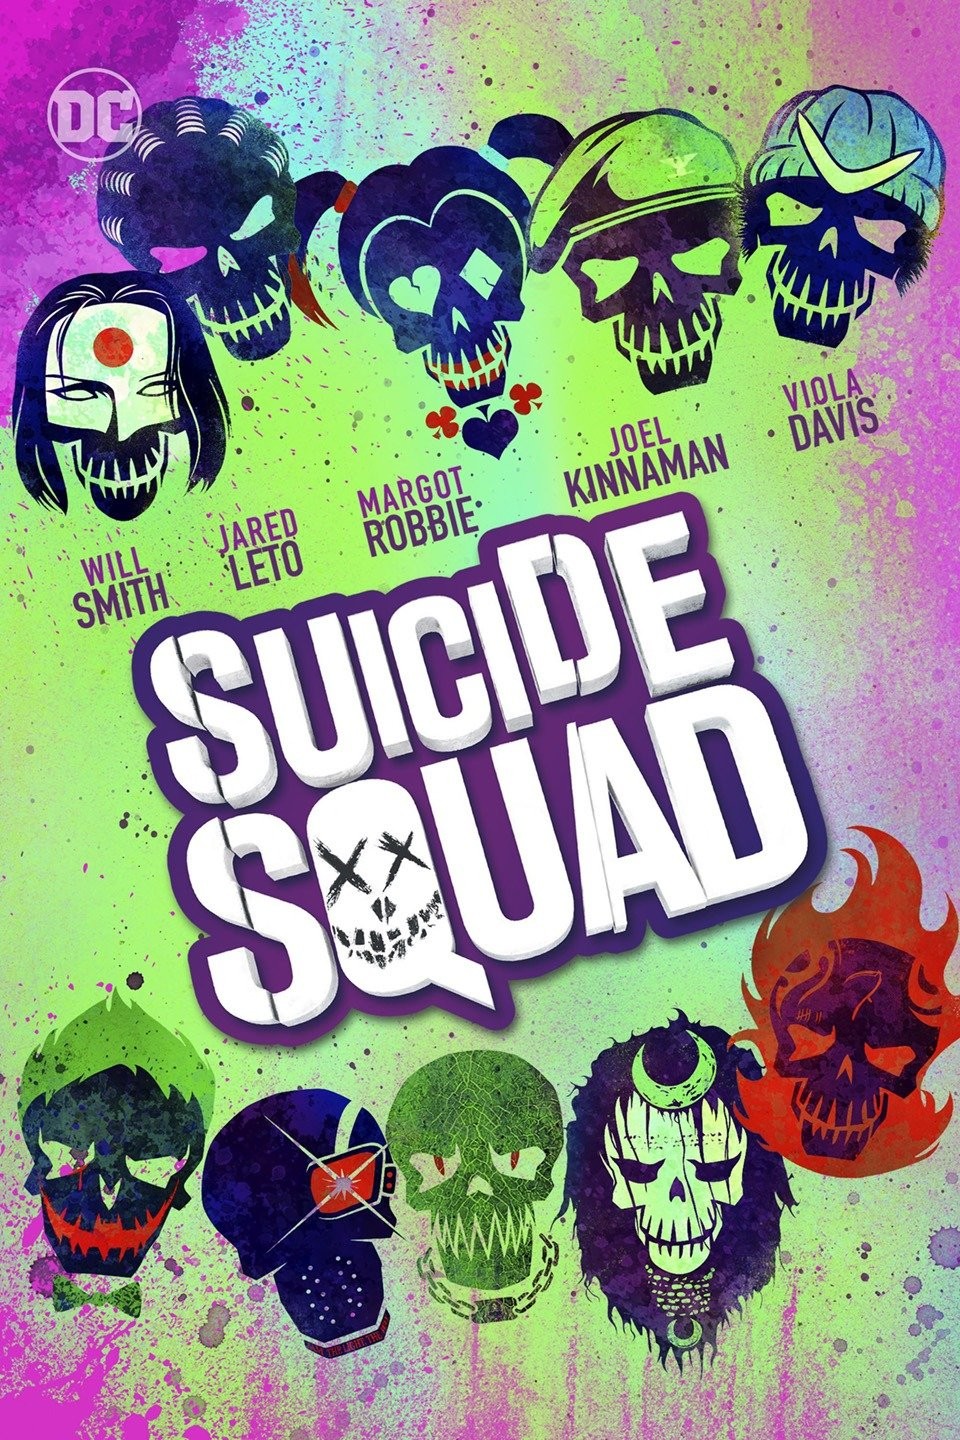 Clip: The Suicide Squad Is Hell on Wheels in New DCU Release